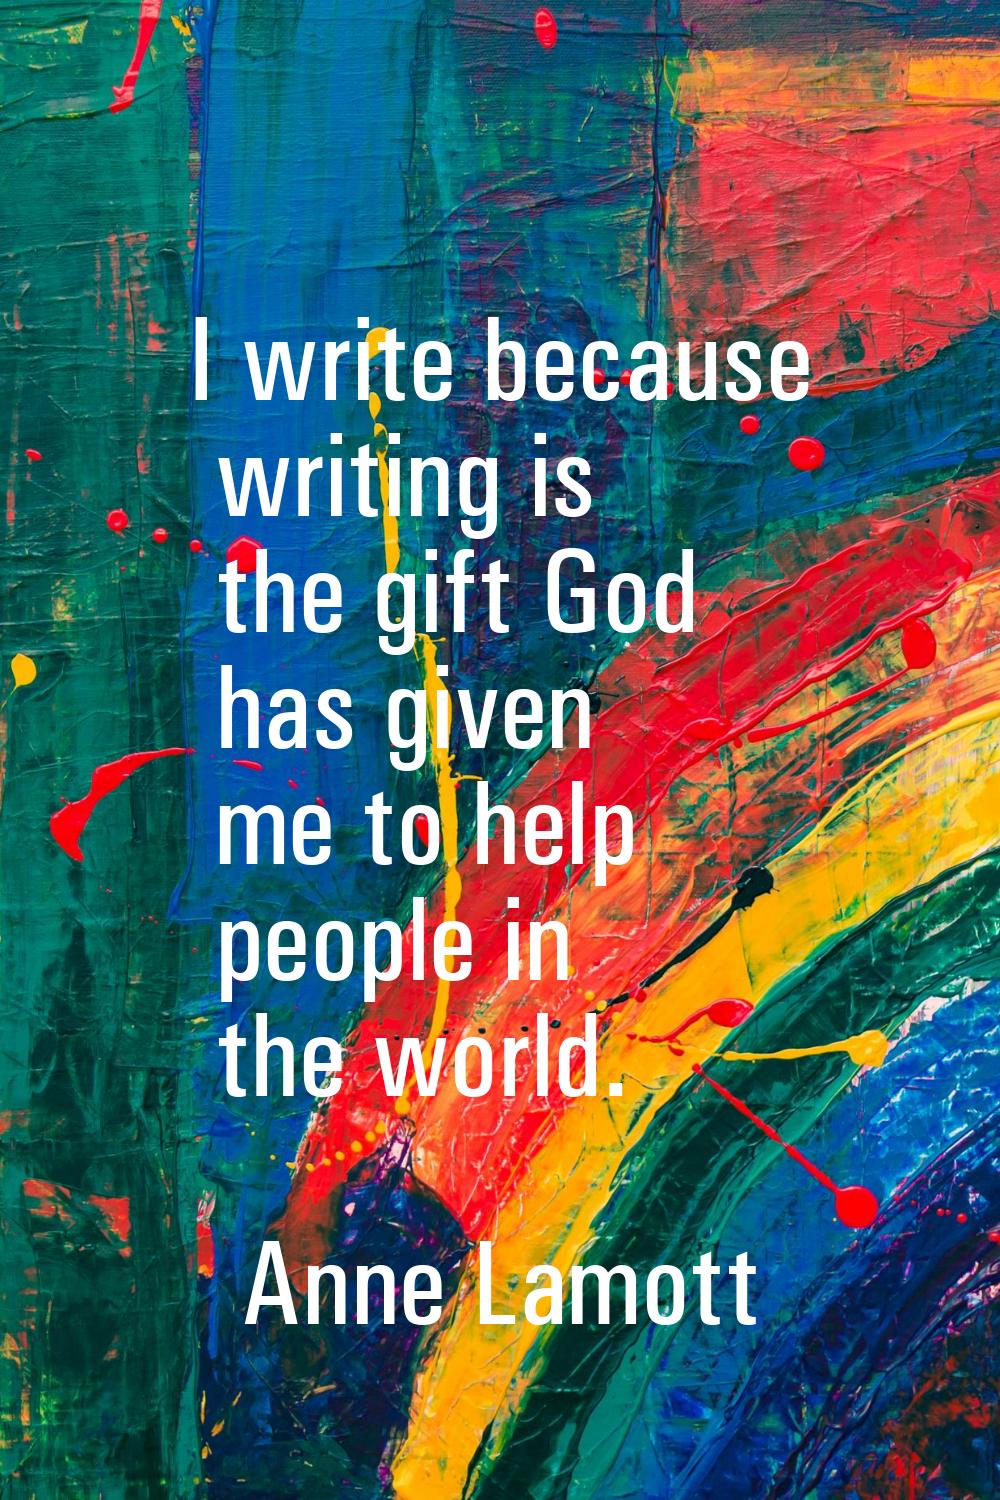 I write because writing is the gift God has given me to help people in the world.